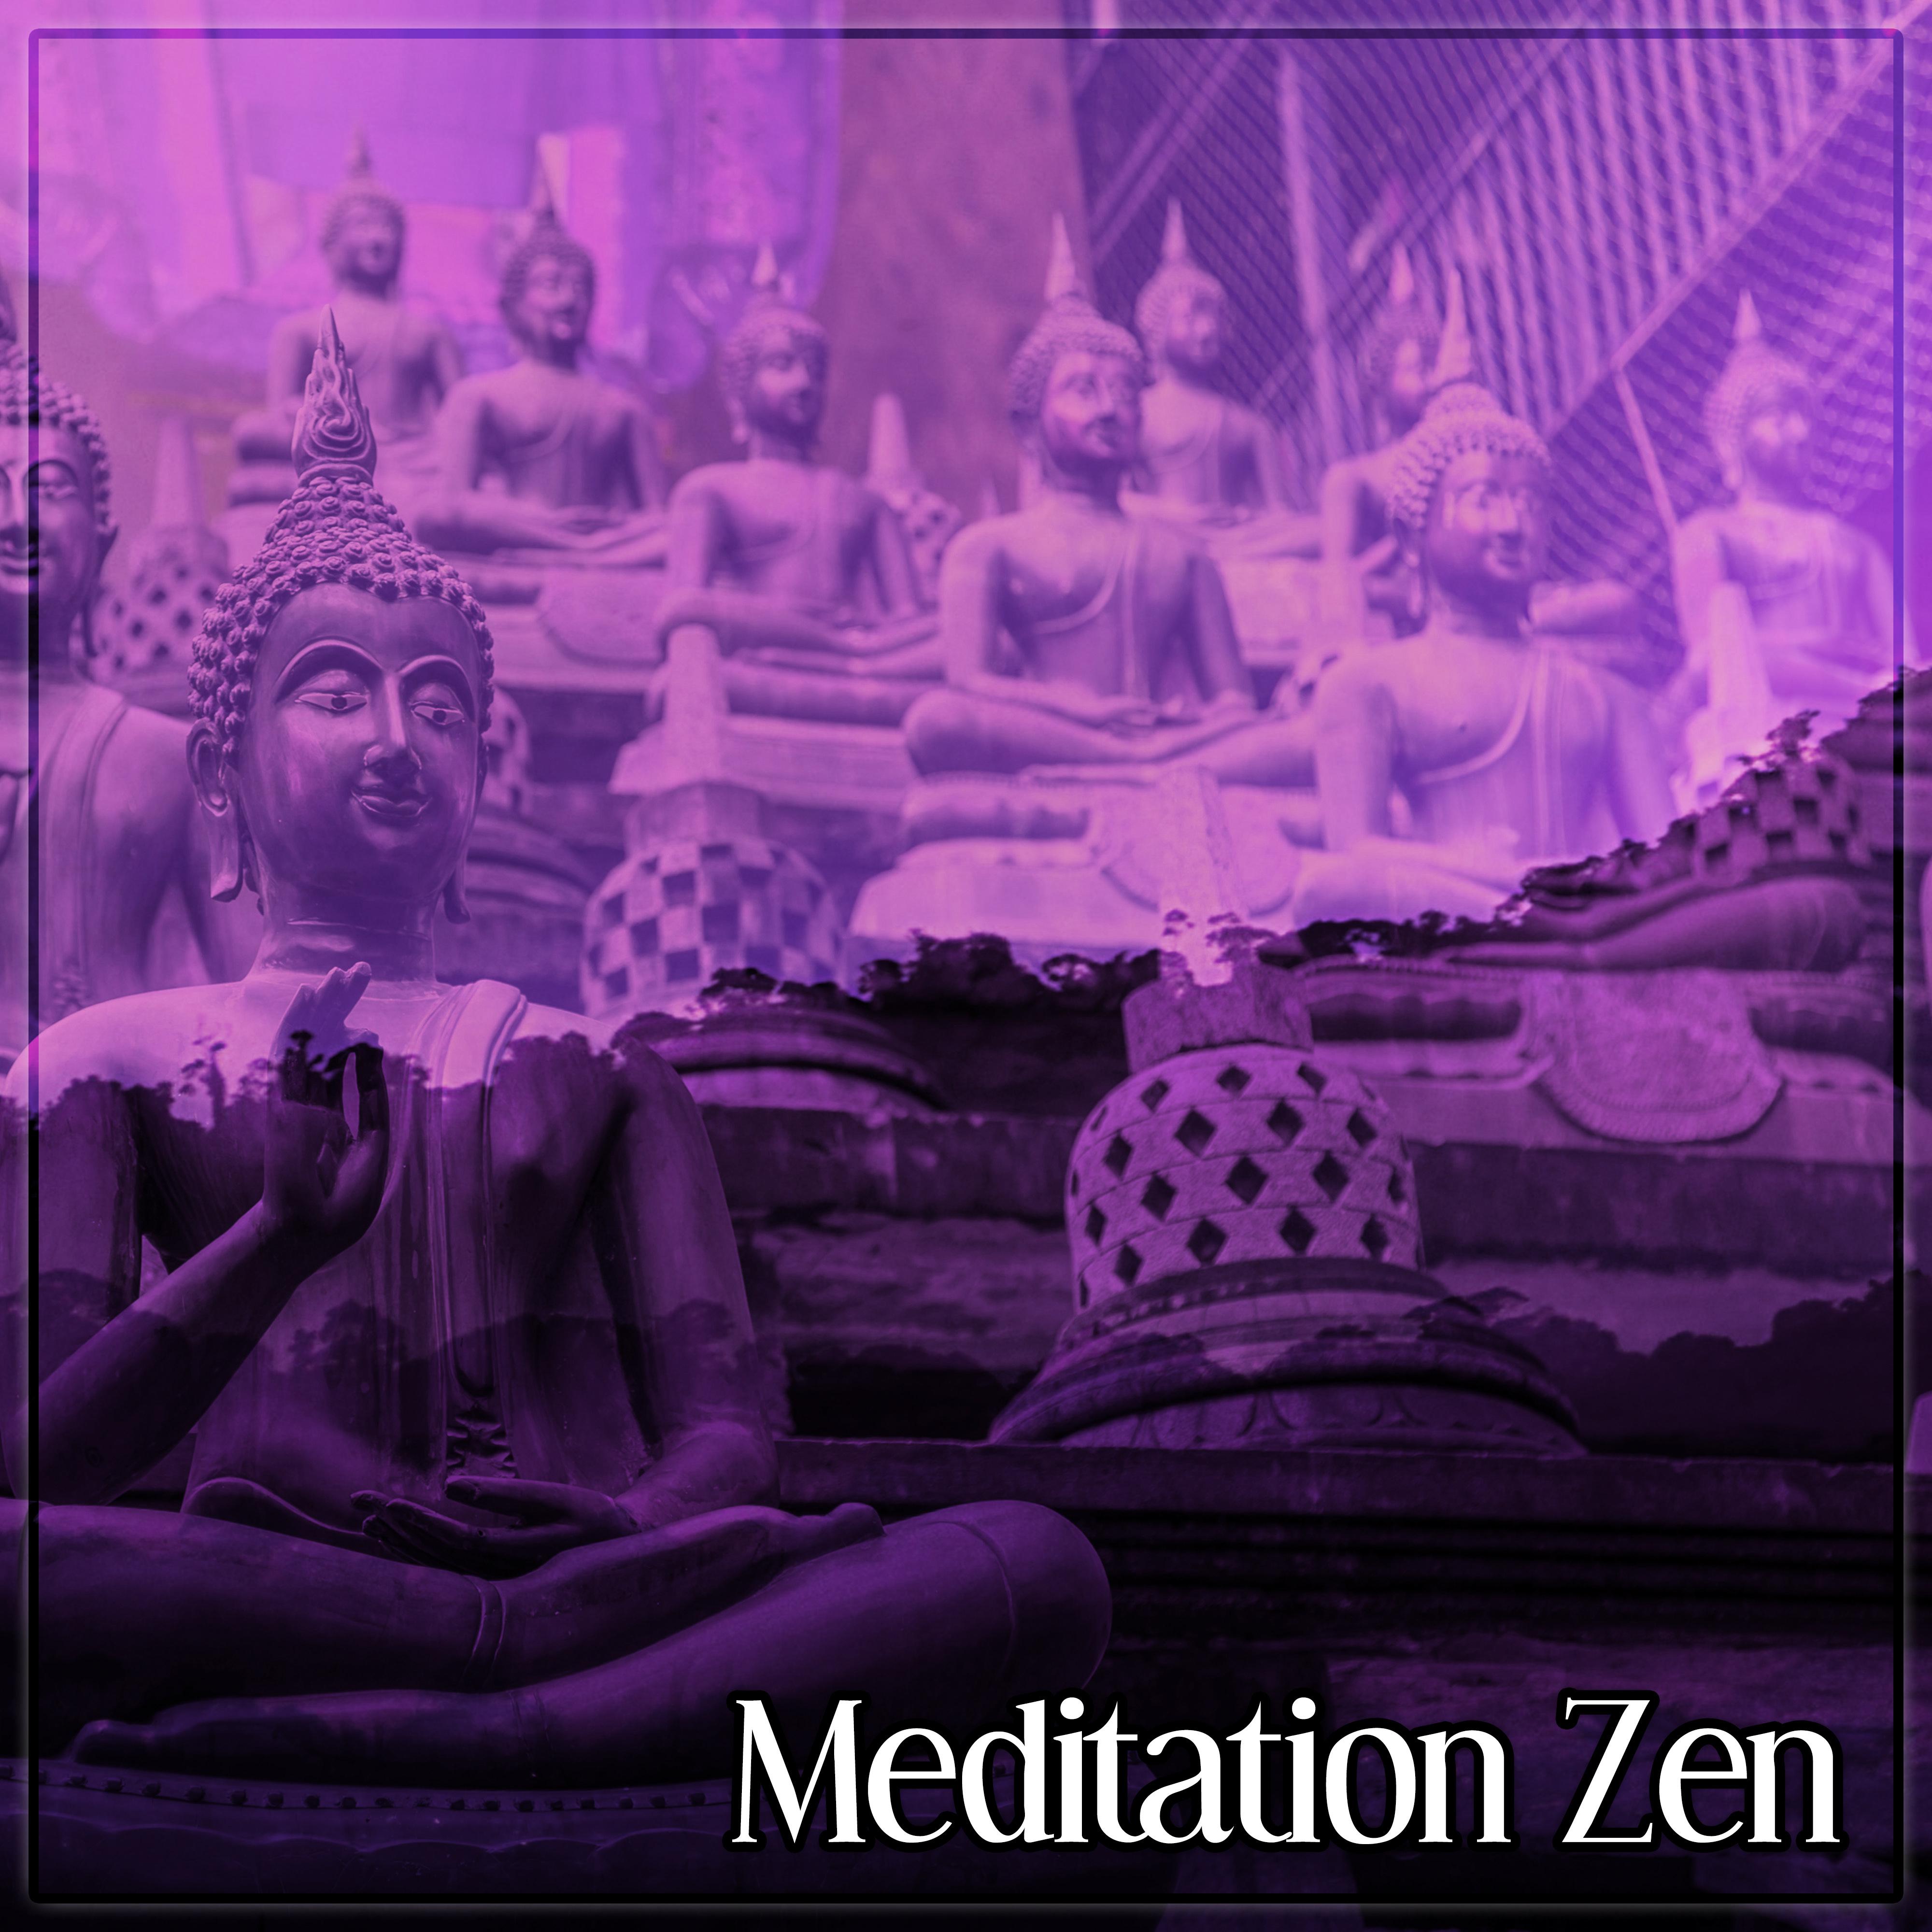 Meditation Zen  Relaxing Sounds of Nature to Yoga Meditation, Mindfullness Meditation, Sound Healing Meditation, Kundalini Yoga Zen Meditation, Nature Sound